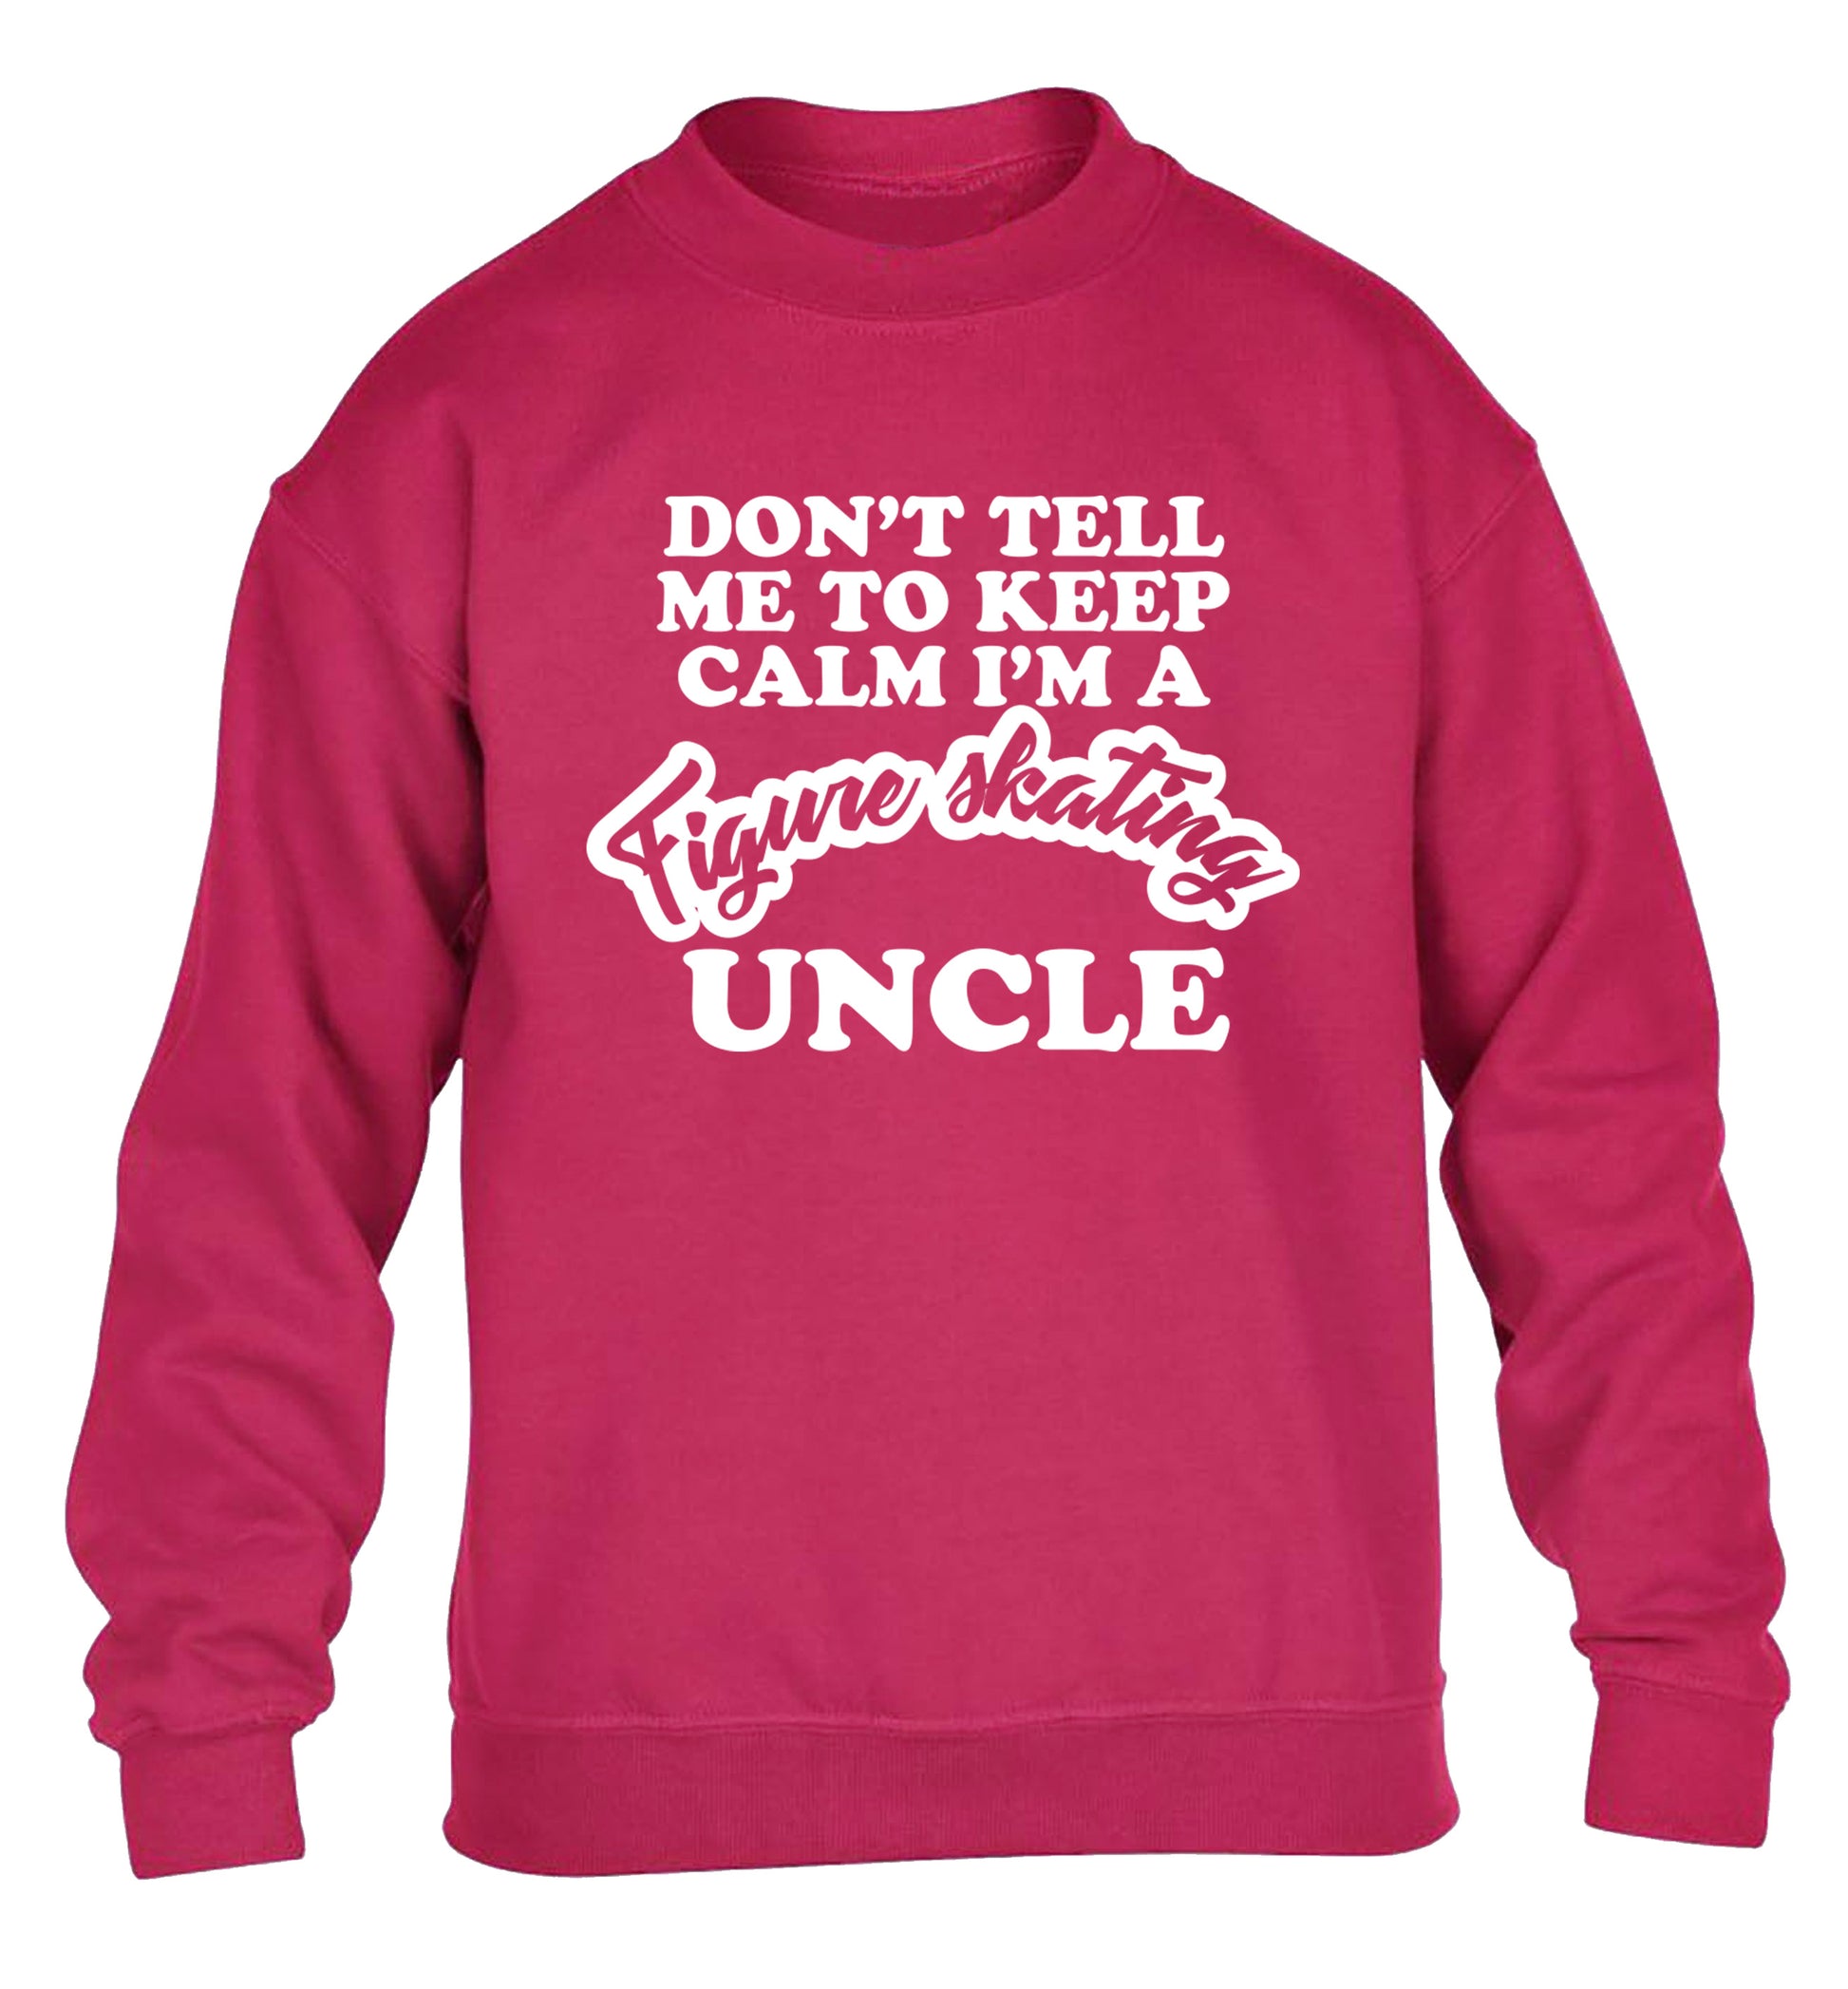 Don't tell me to keep calm I'm a figure skating uncle children's pink sweater 12-14 Years